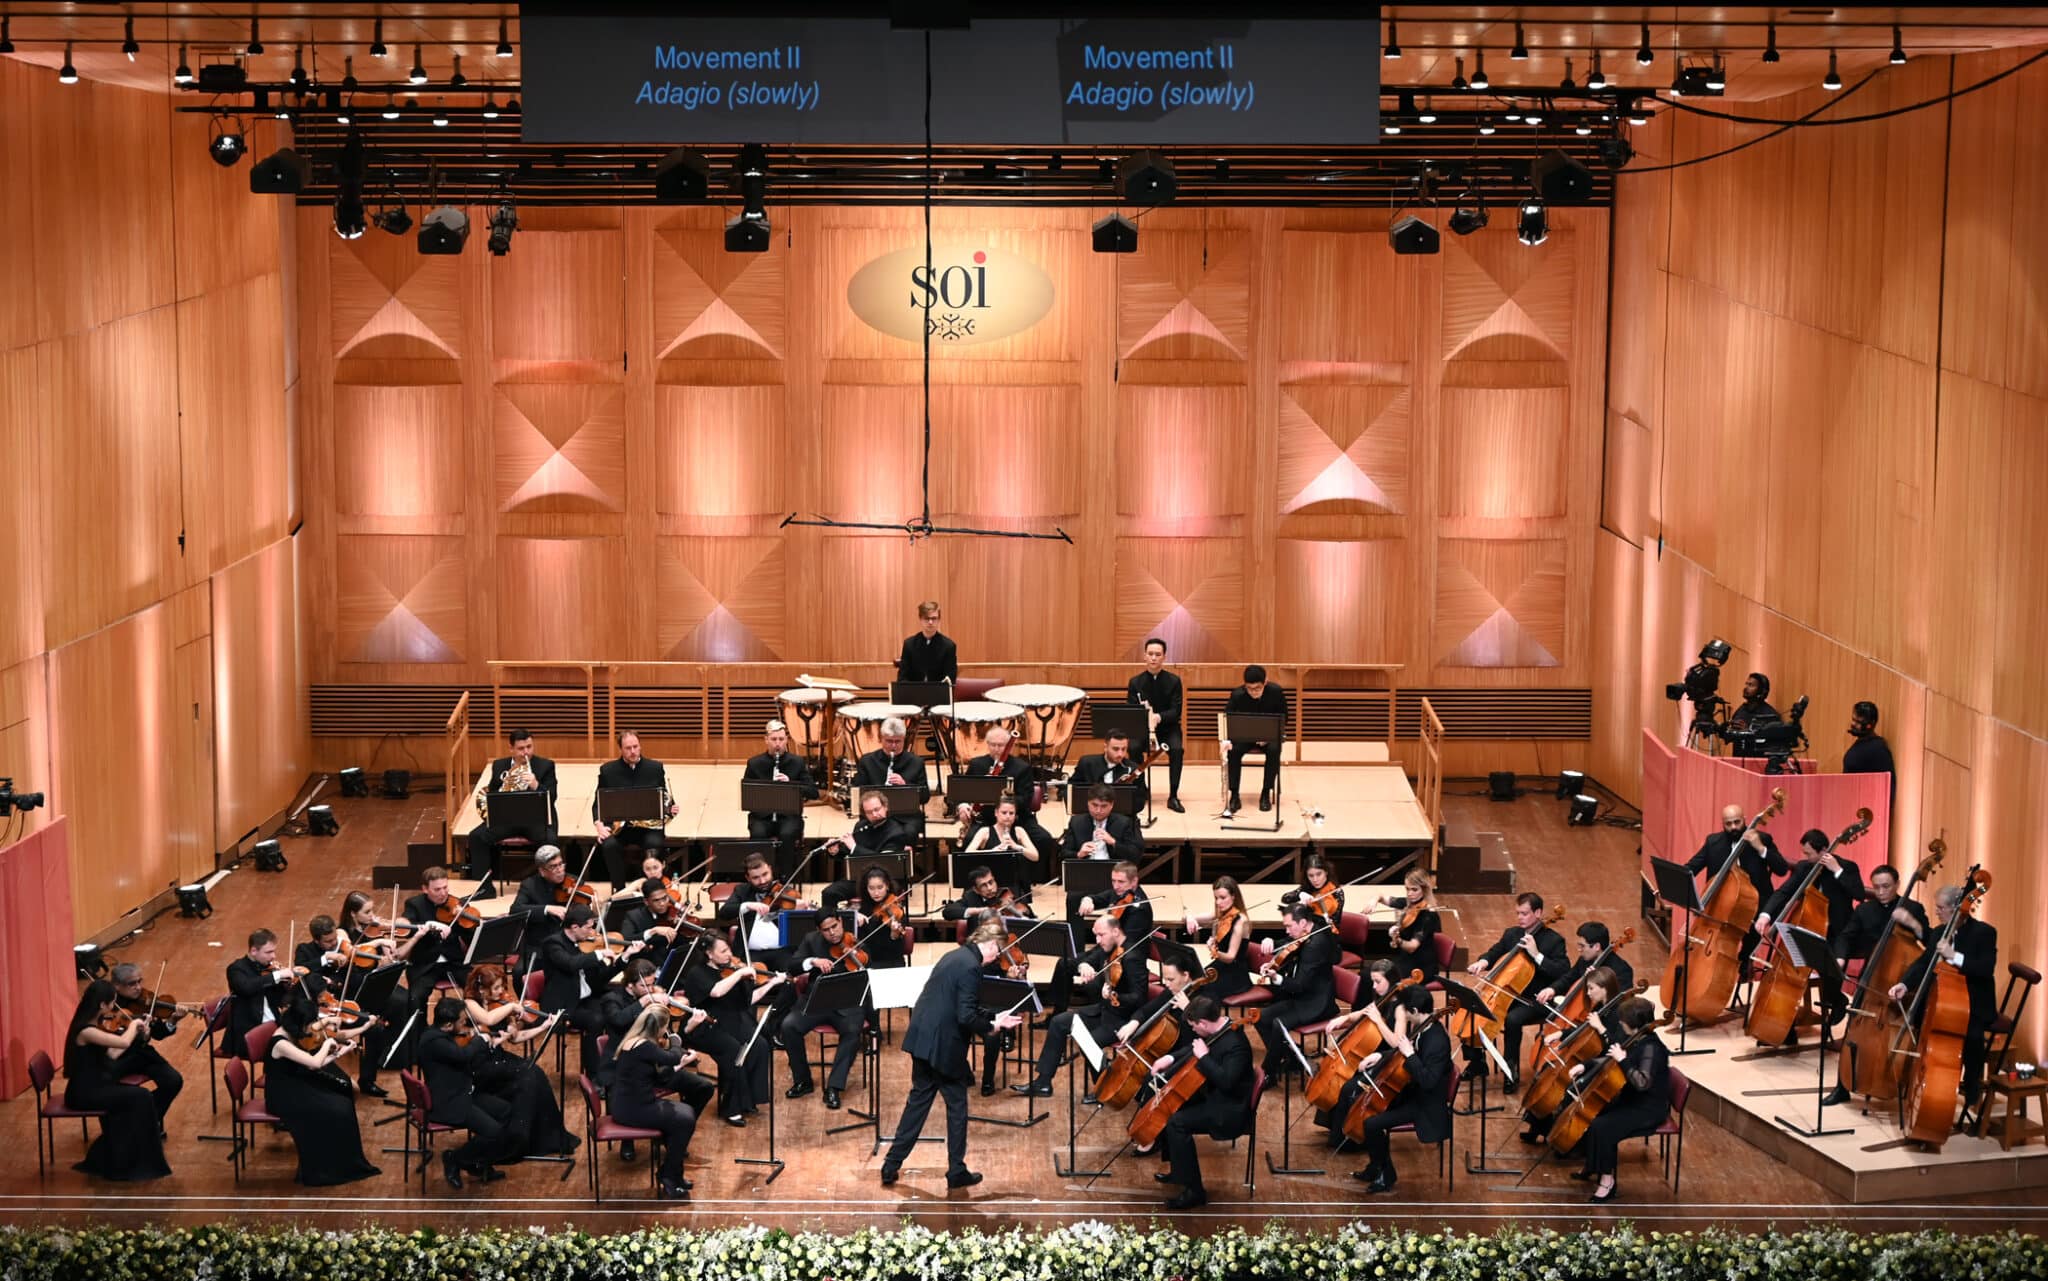 Symphony Orchestra of India Spring 2020 Season conducted by Augustin Dumay and performed by Maria João Pires (piano) at Jamshed Bhabha Theatre, NCPA. Photo: Narendra Dangiya/NCPA Photos